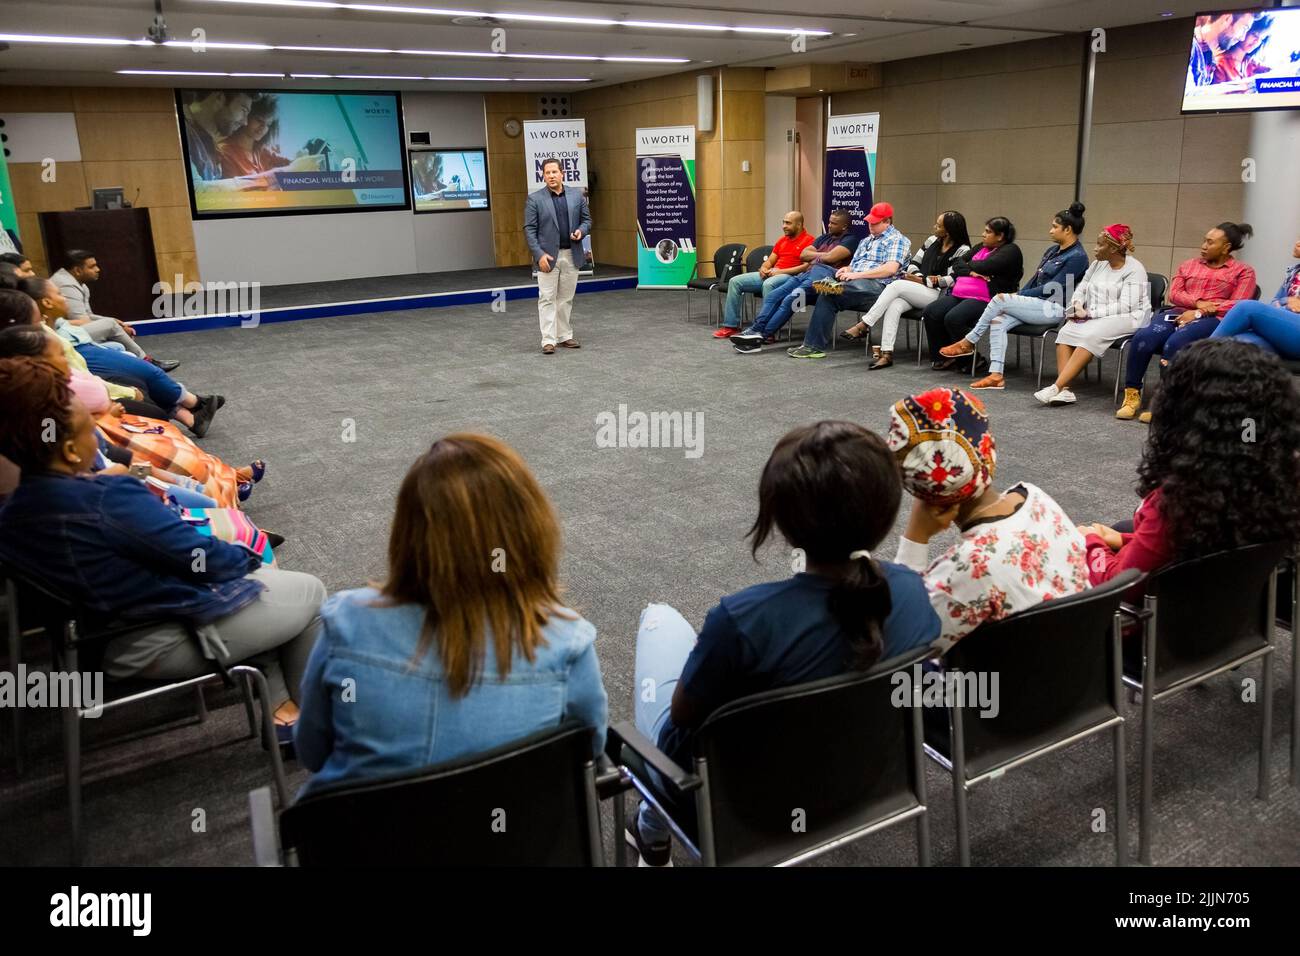 The educator instructing diverse adult students on personal finance in Johannesburg, South Africa Stock Photo